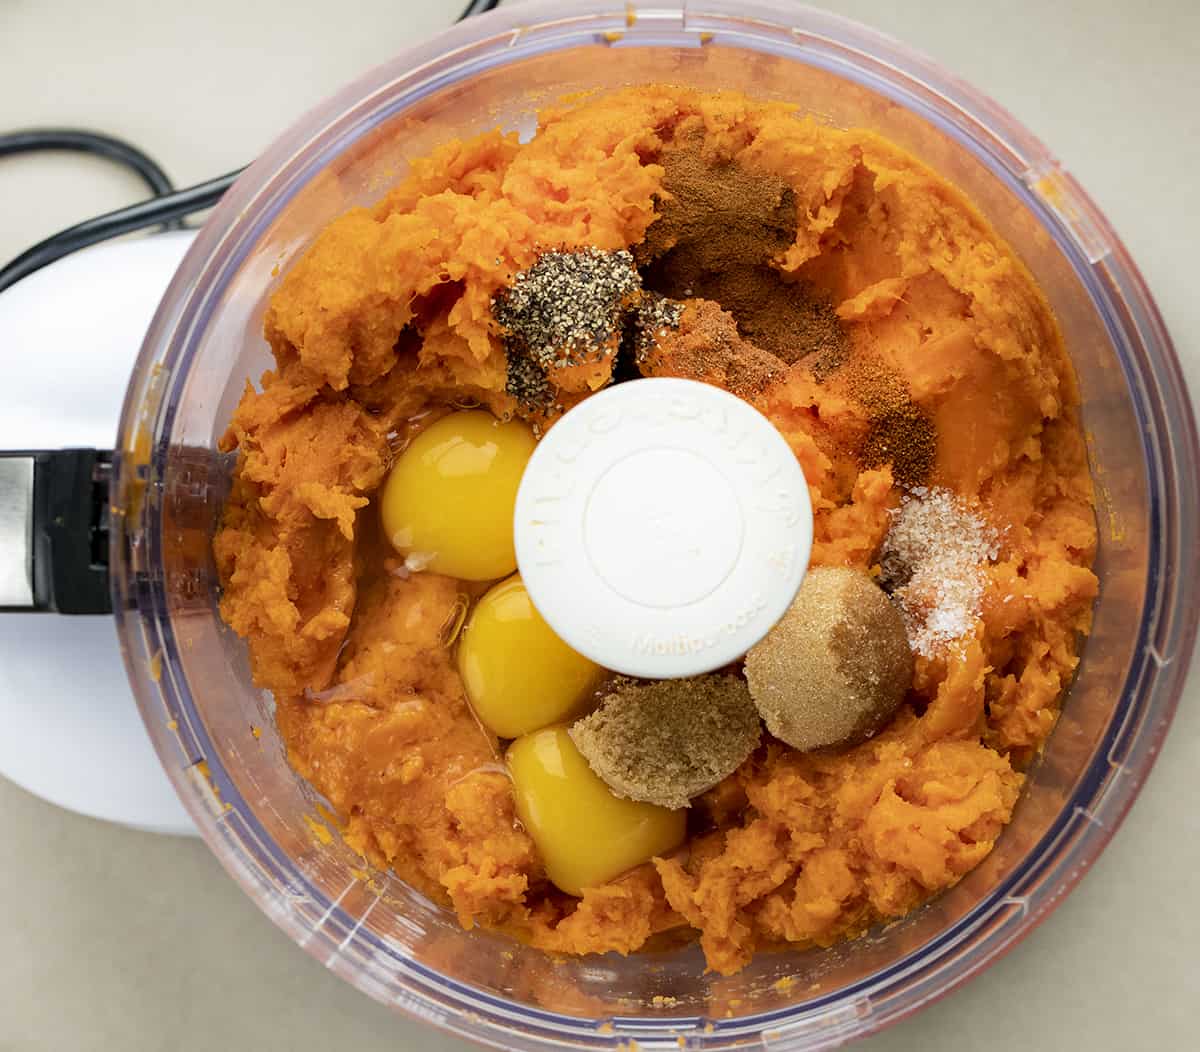 Ingredients for Sweet Potatoes with Pecan Streusel Topping in a Food Processor.